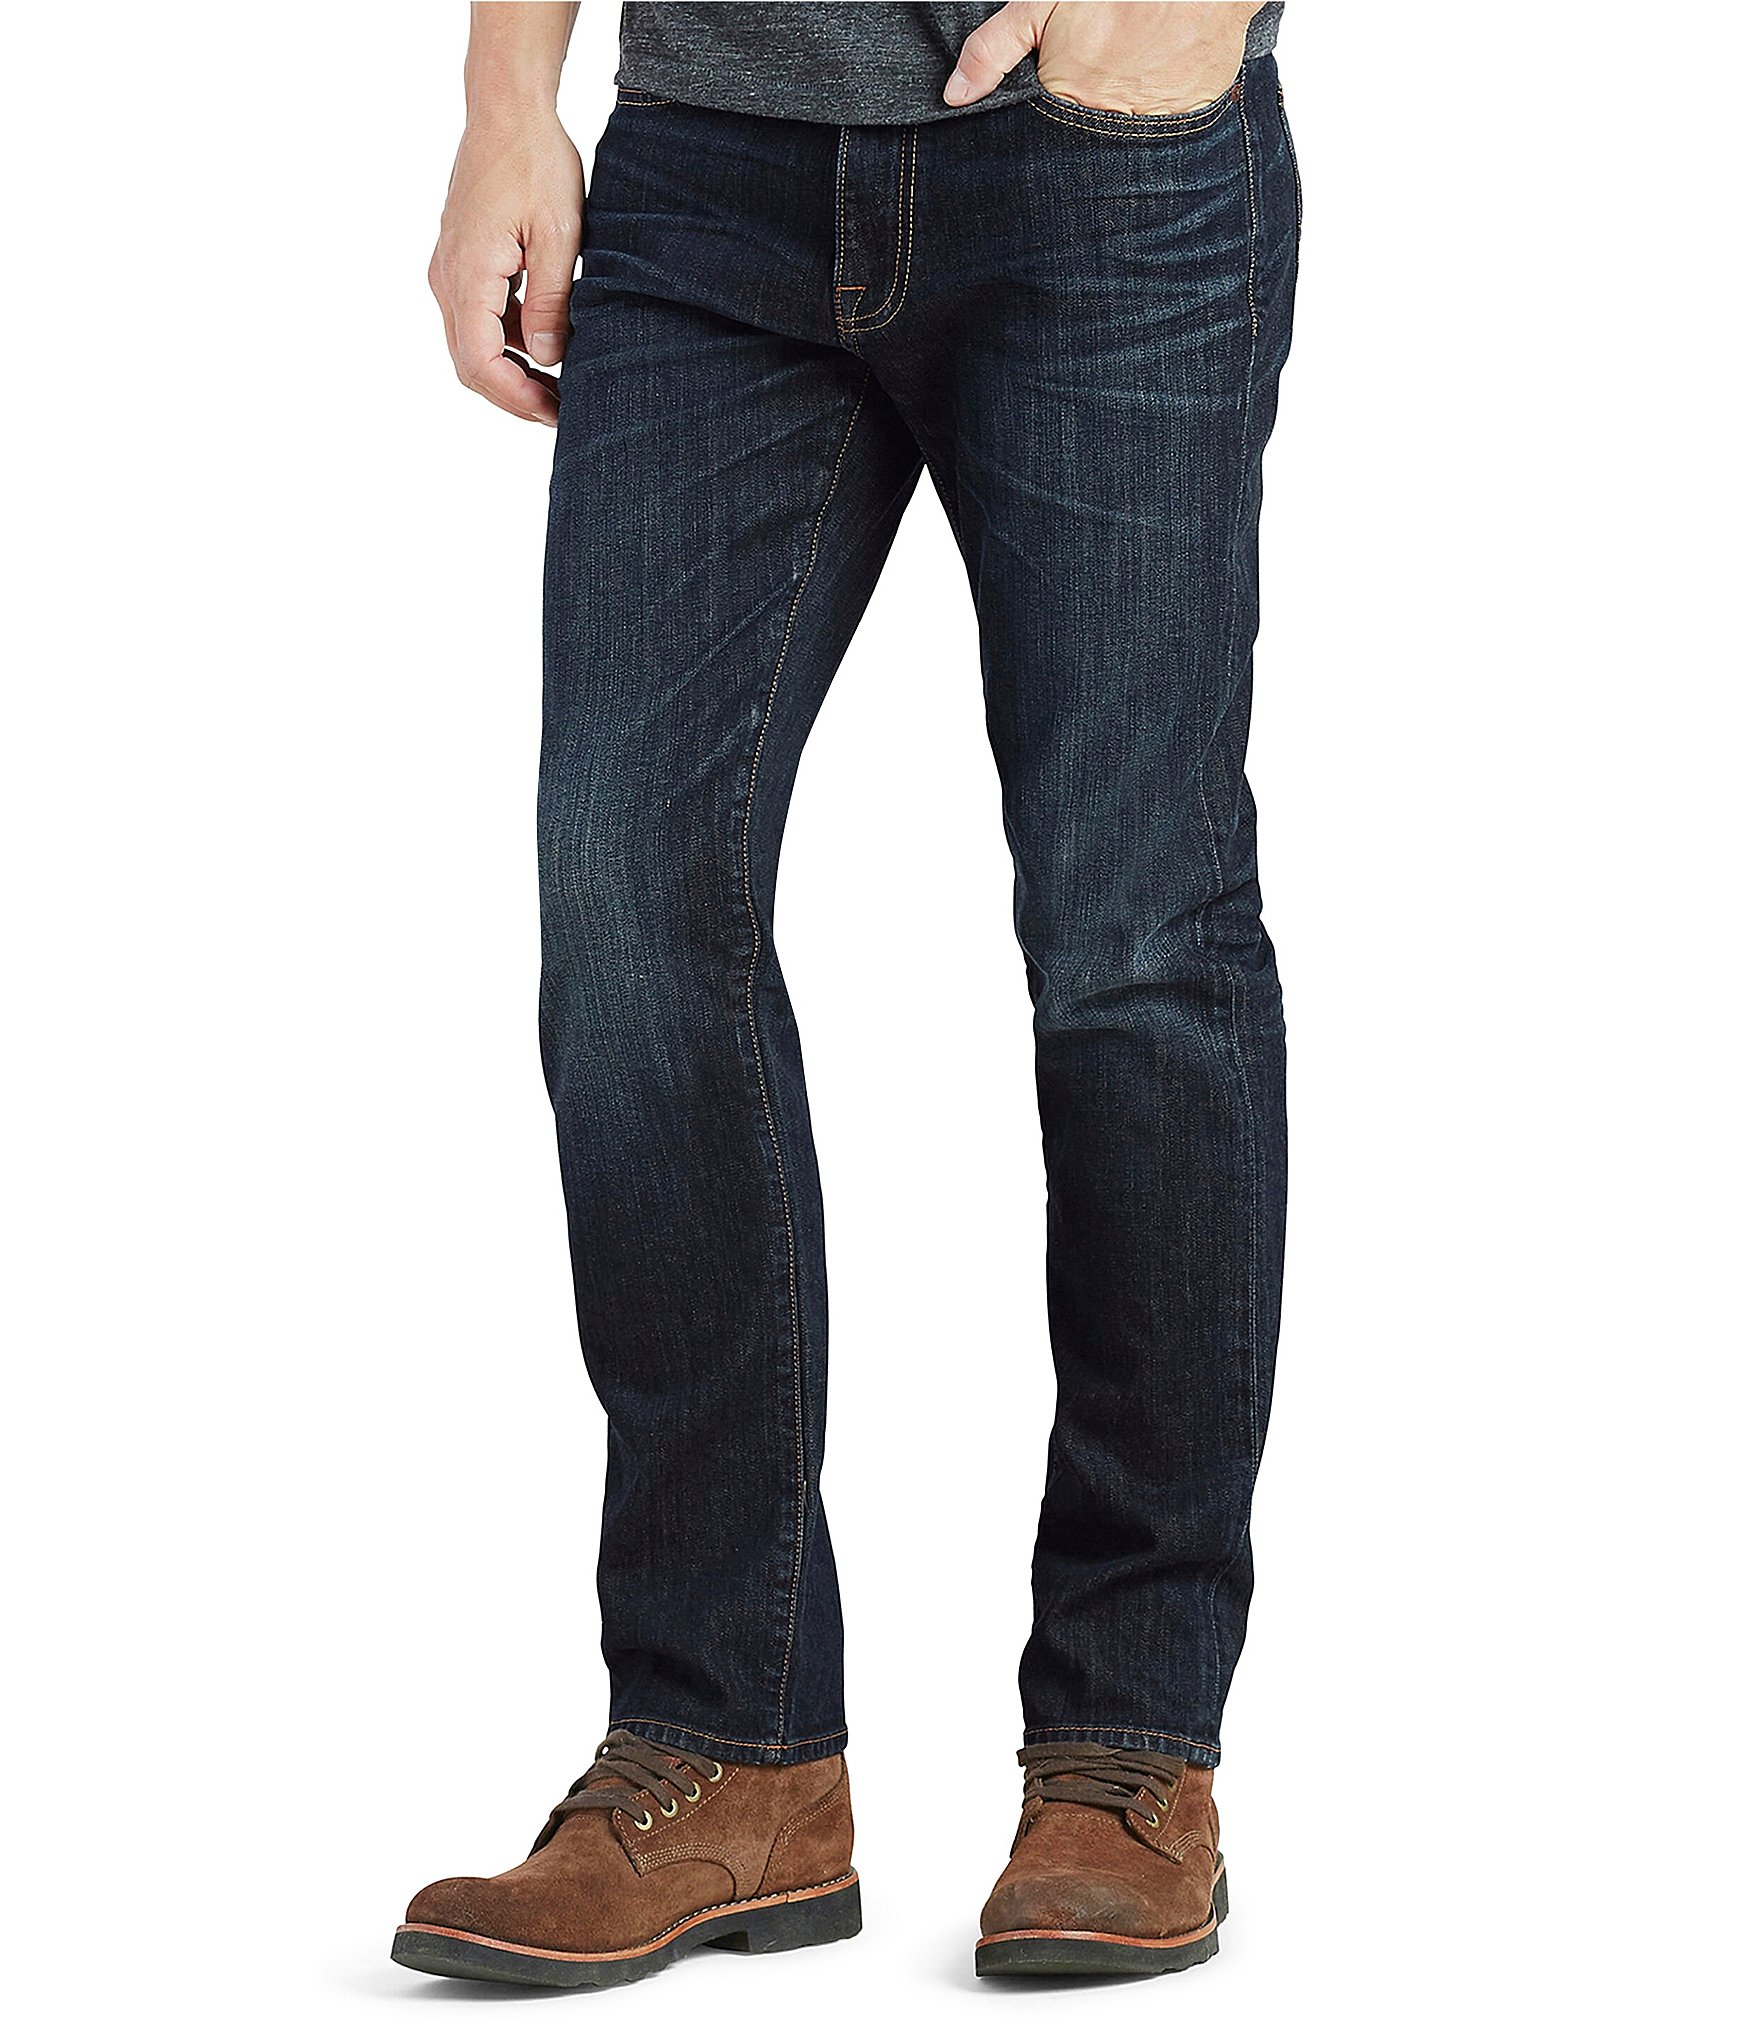 https://dimg.dillards.com/is/image/DillardsZoom/zoom/lucky-brand-410-athletic-fit-jeans/00000001_zi_barite04464283.jpg